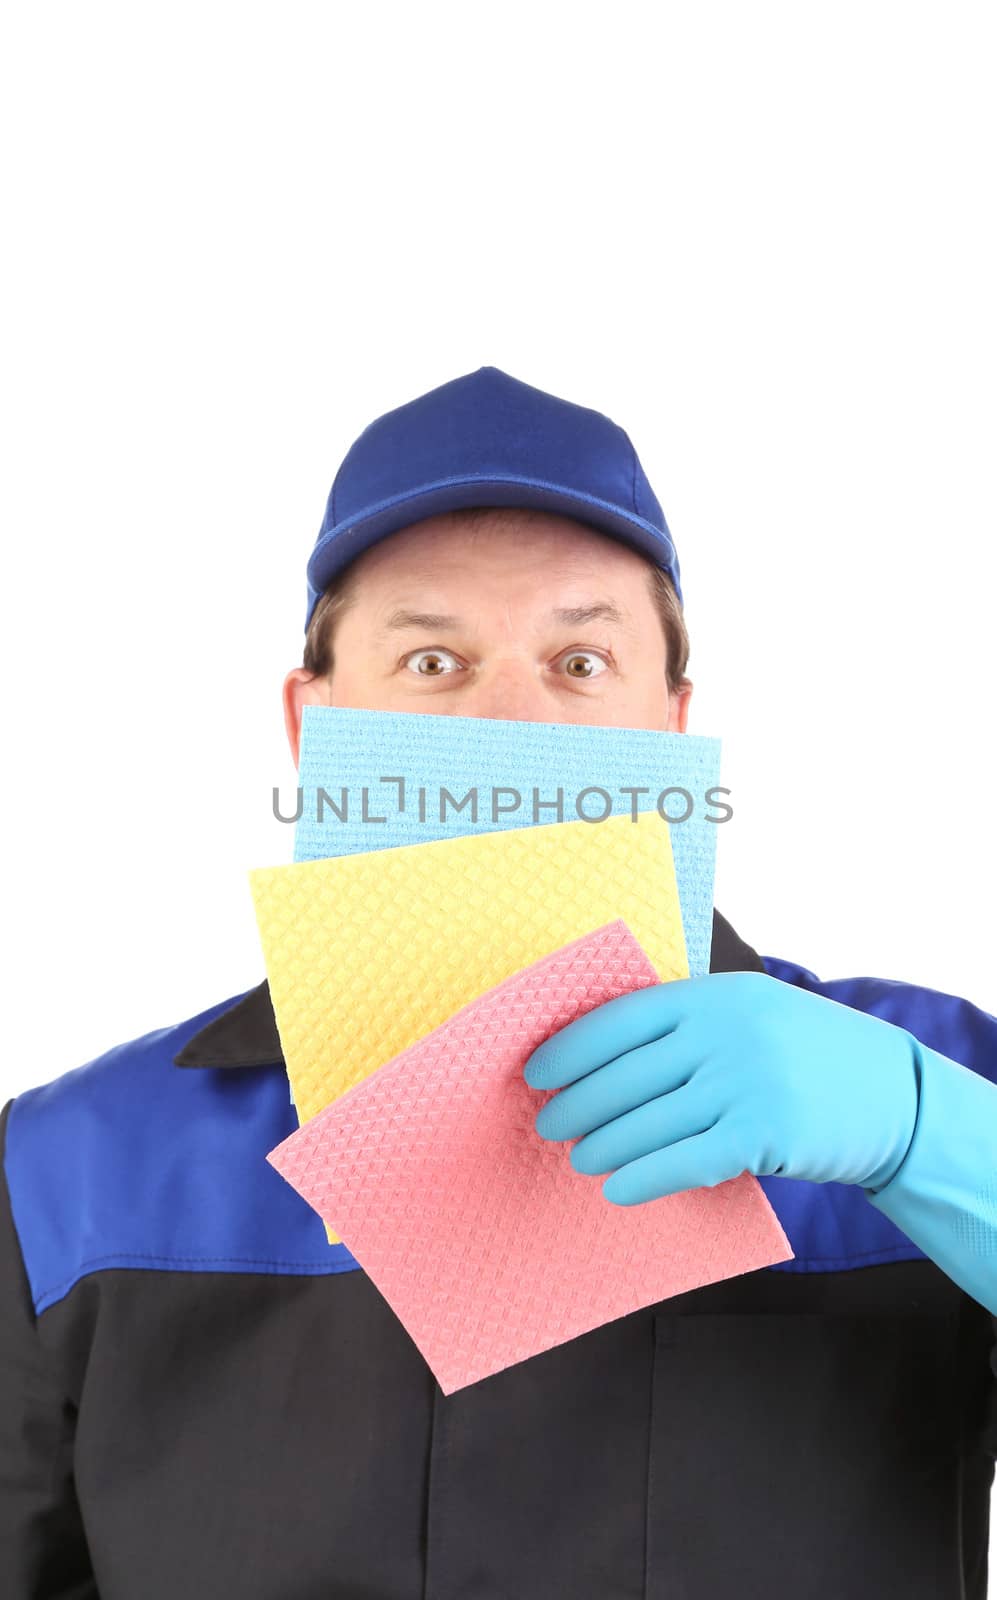 Man holds bottle and sponge. Isolated on a white background.